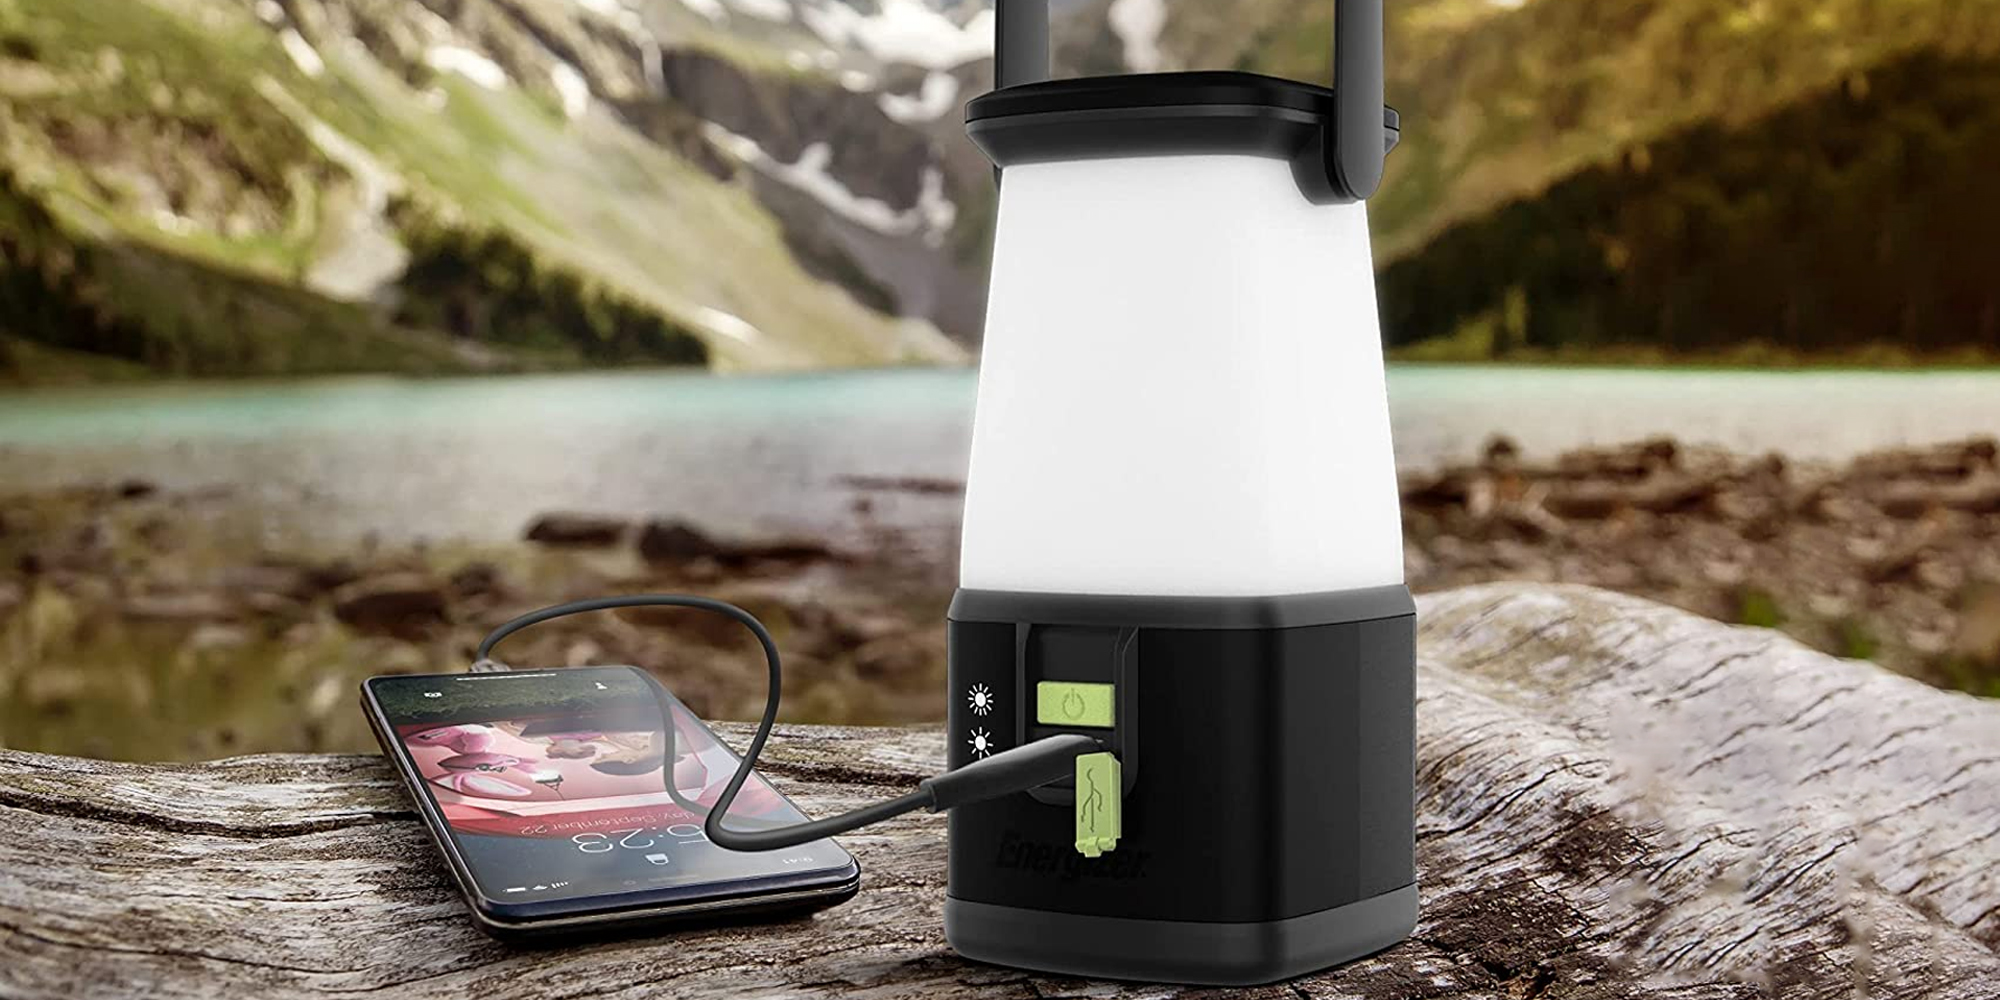 Light up your tent or powerless home with Energizer's 360 PRO LED Lantern  at $9